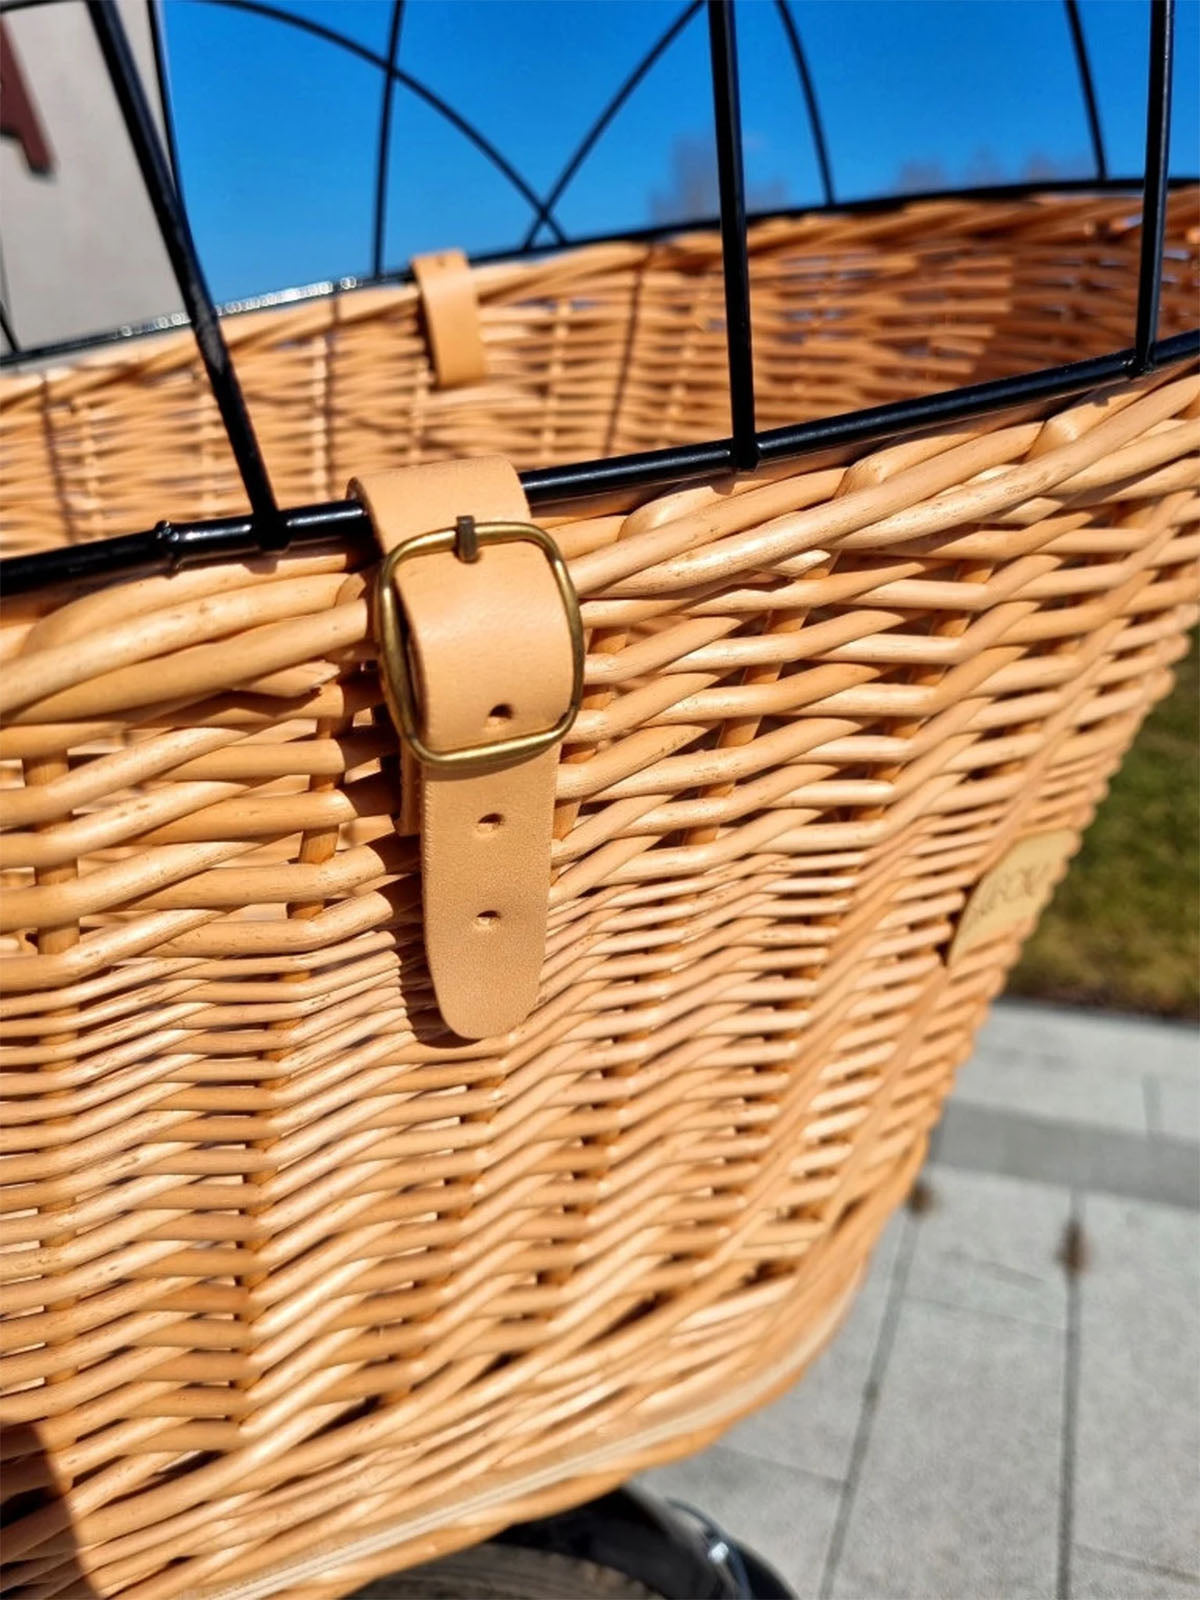 Wicker Dog or Cat Carrier with Protective Grille - for Bicycle Luggage Rack & Metal Holder - Natural Rattan Color with Soft Cotton Cushion